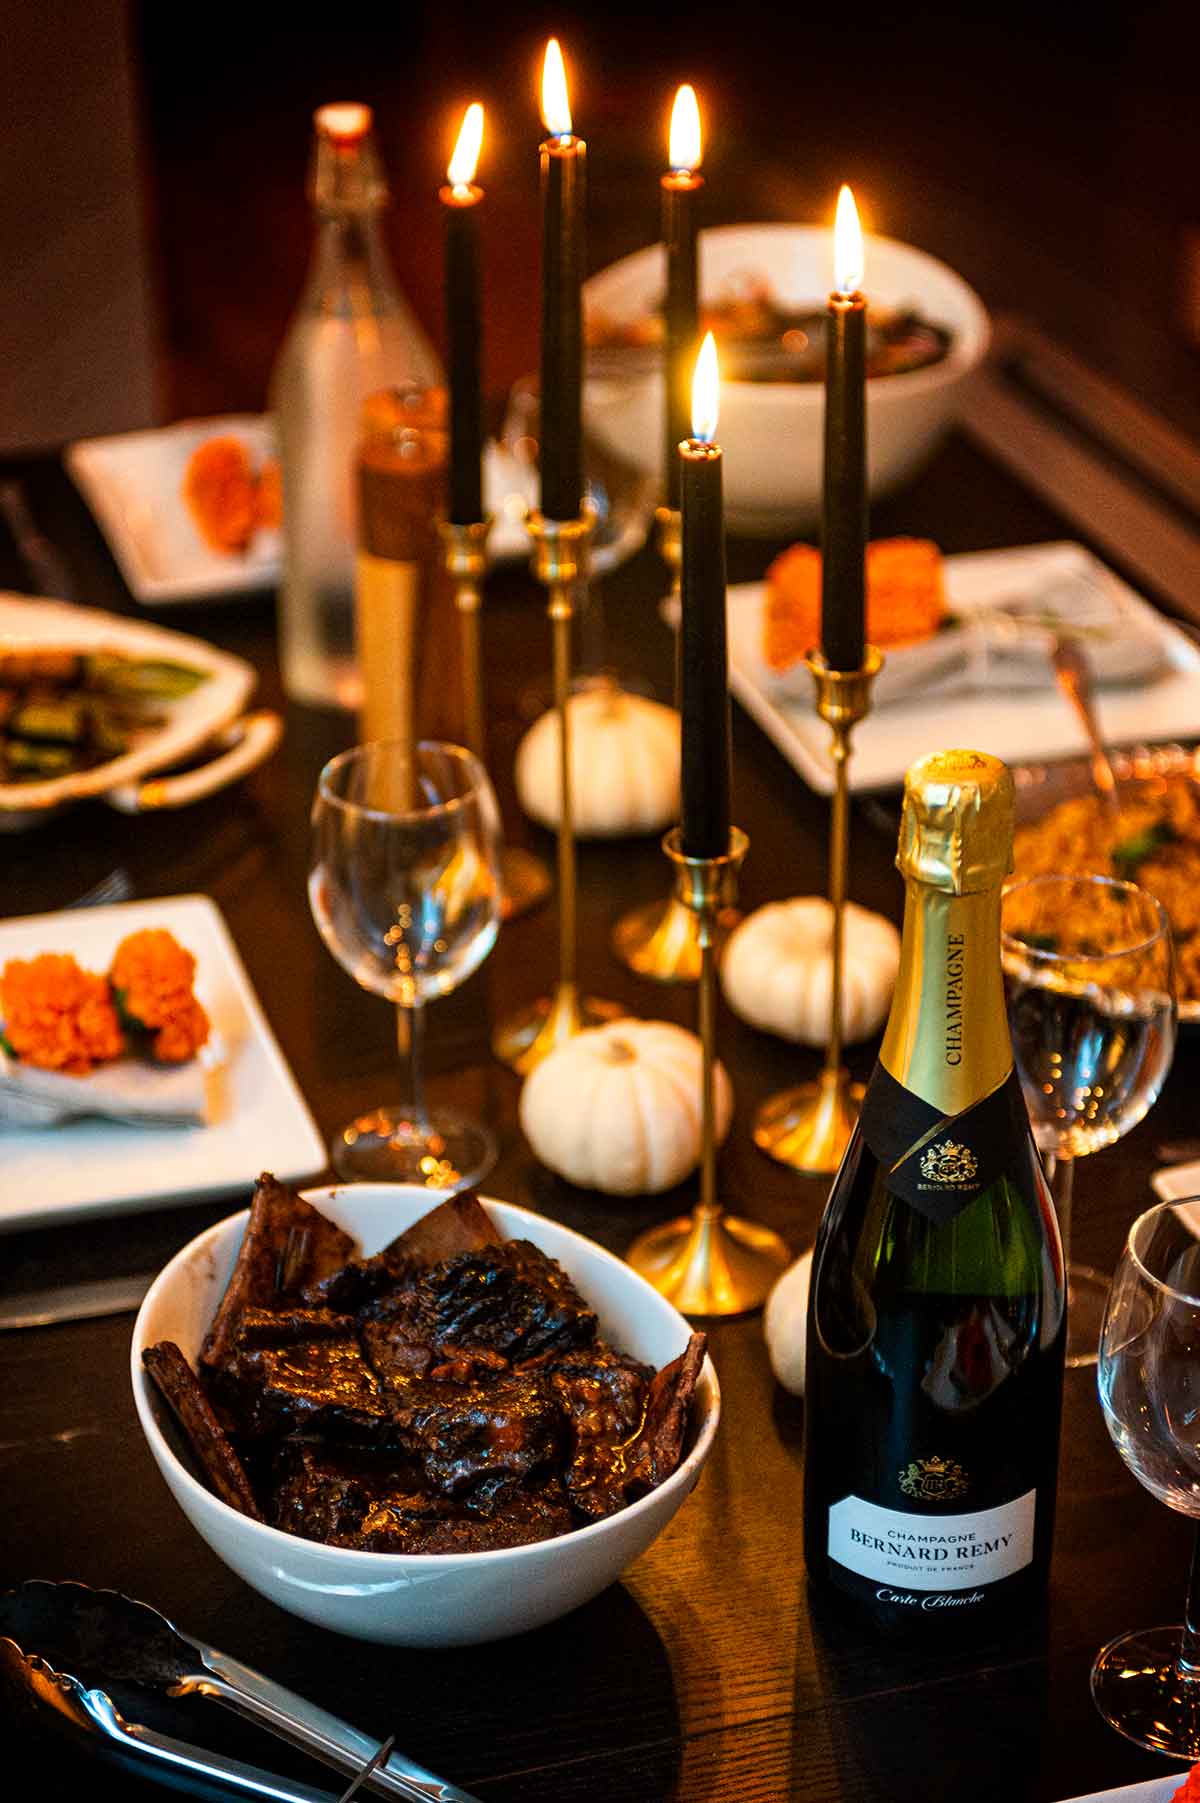 A dark dinner table with black candles, marigolds, short ribs and champagne.